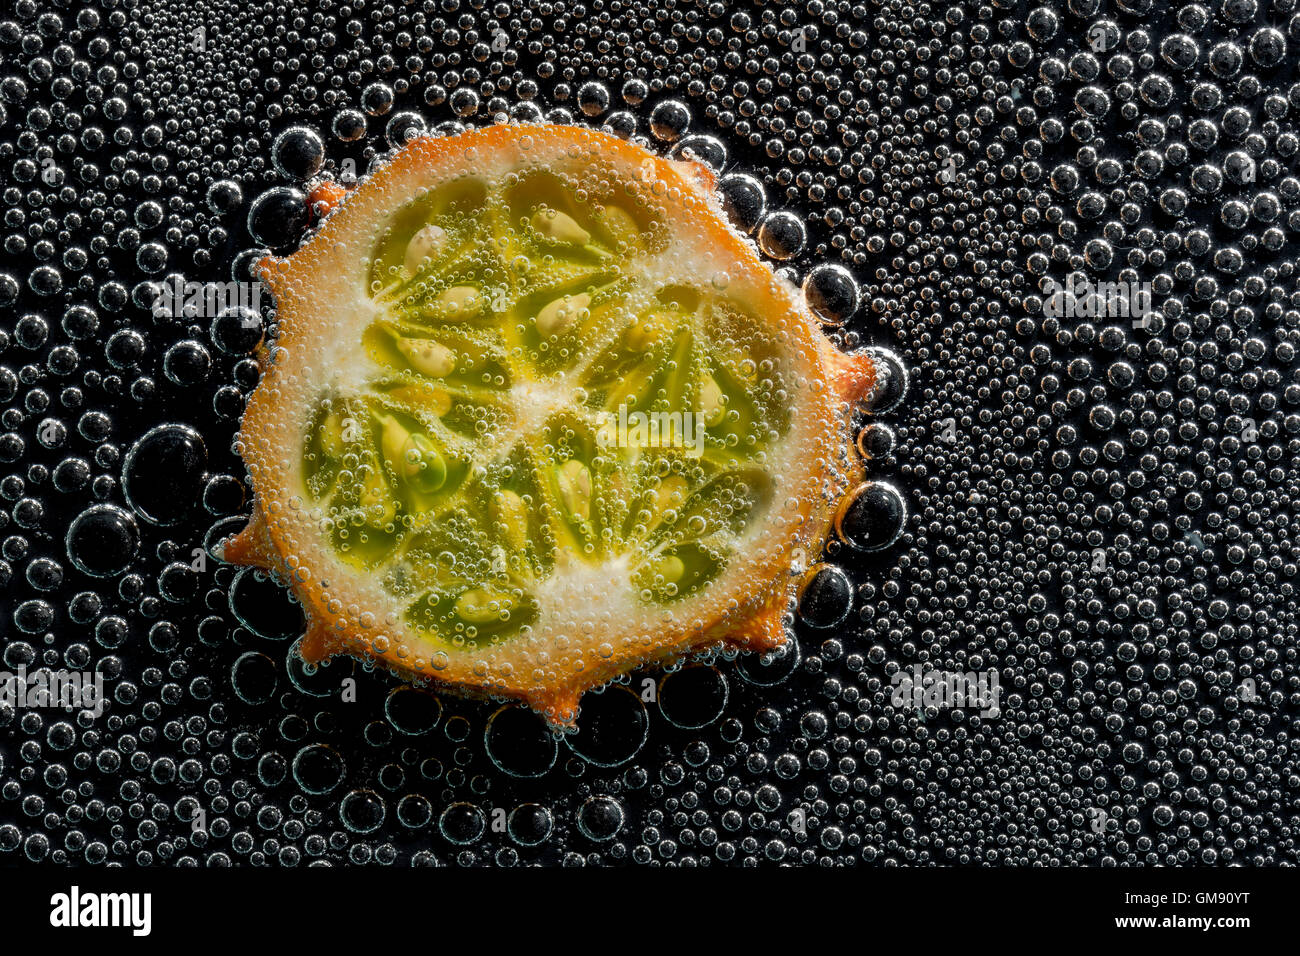 Kiwano, horned melon fruit in mineral water, a series of photos. Close-up carbonated water against black background Stock Photo